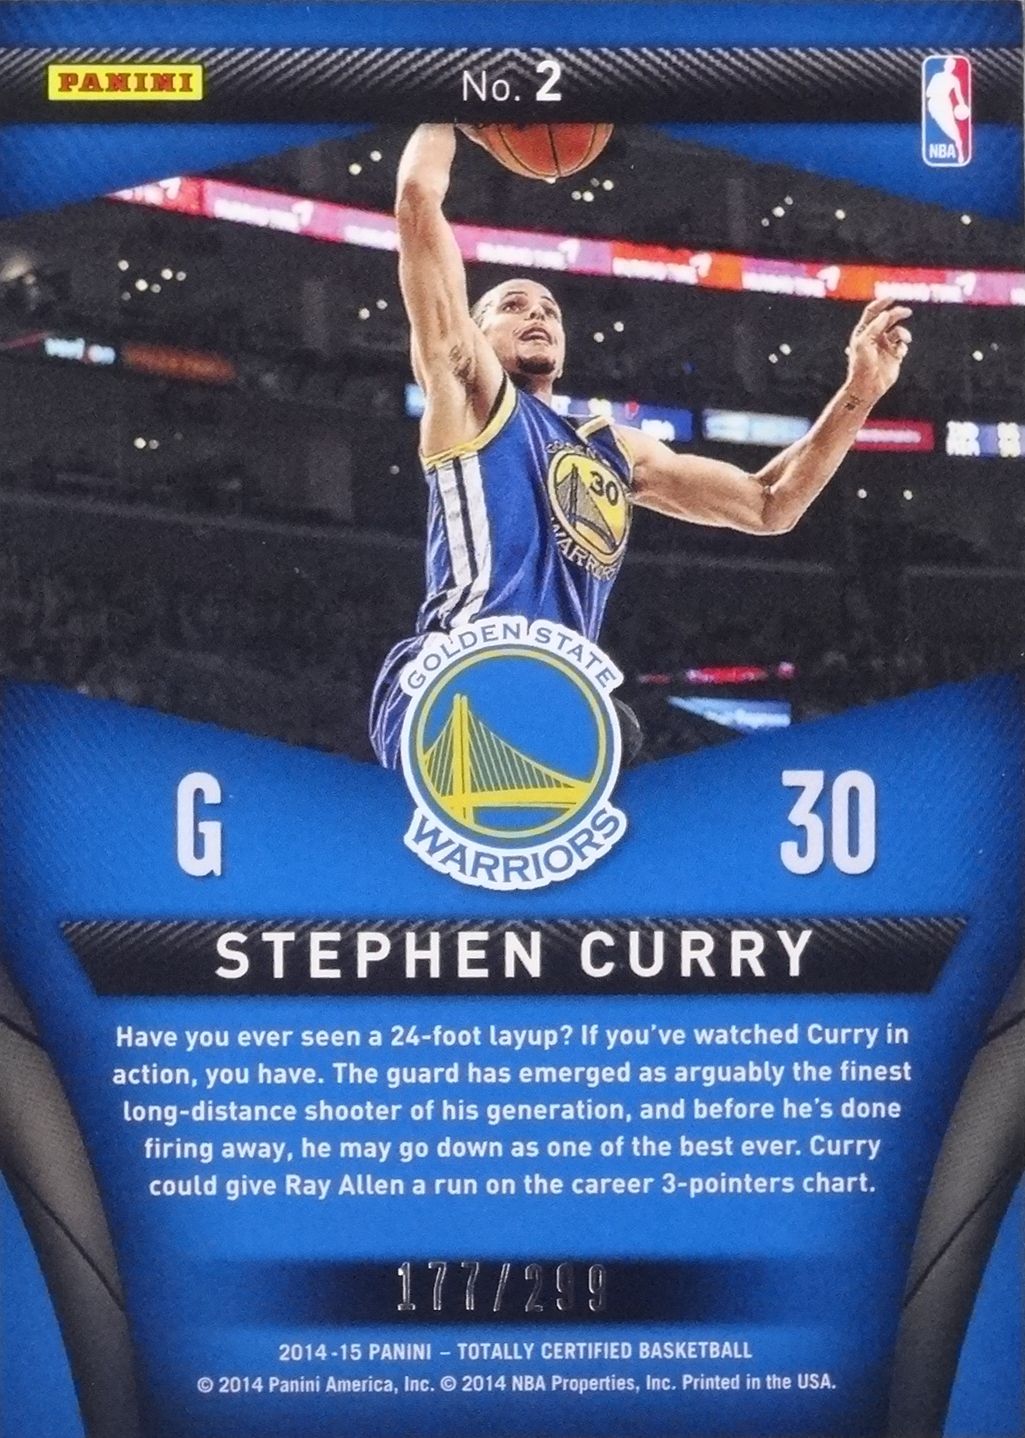 2014-15 Totally Certified Skills #2 Stephen Curry 299 - Back.JPG